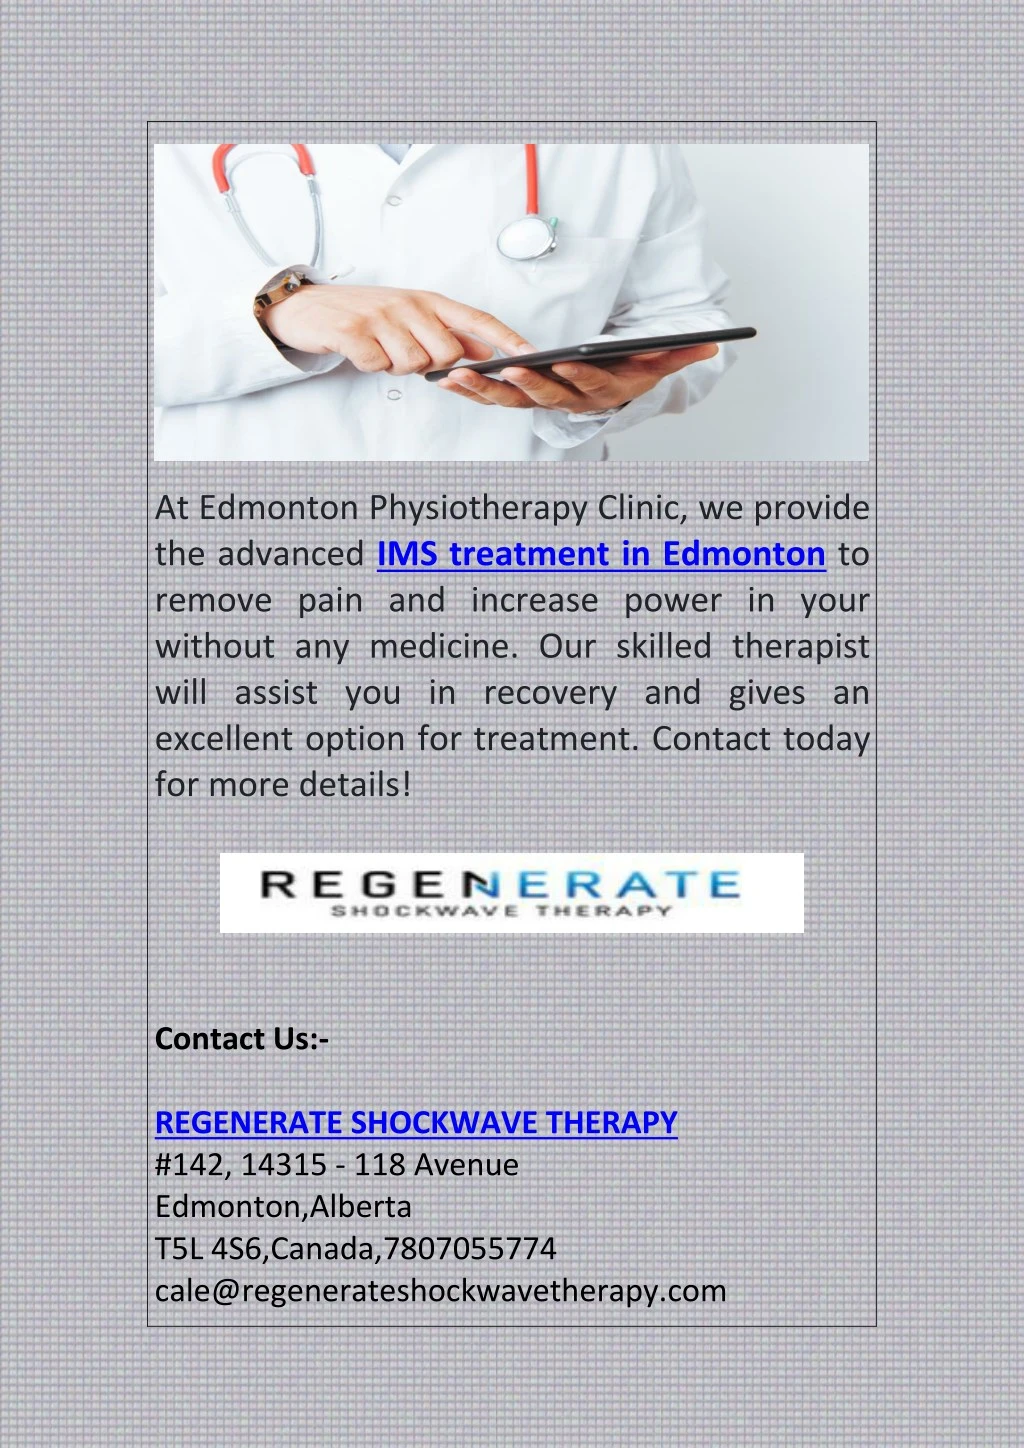 at edmonton physiotherapy clinic we provide